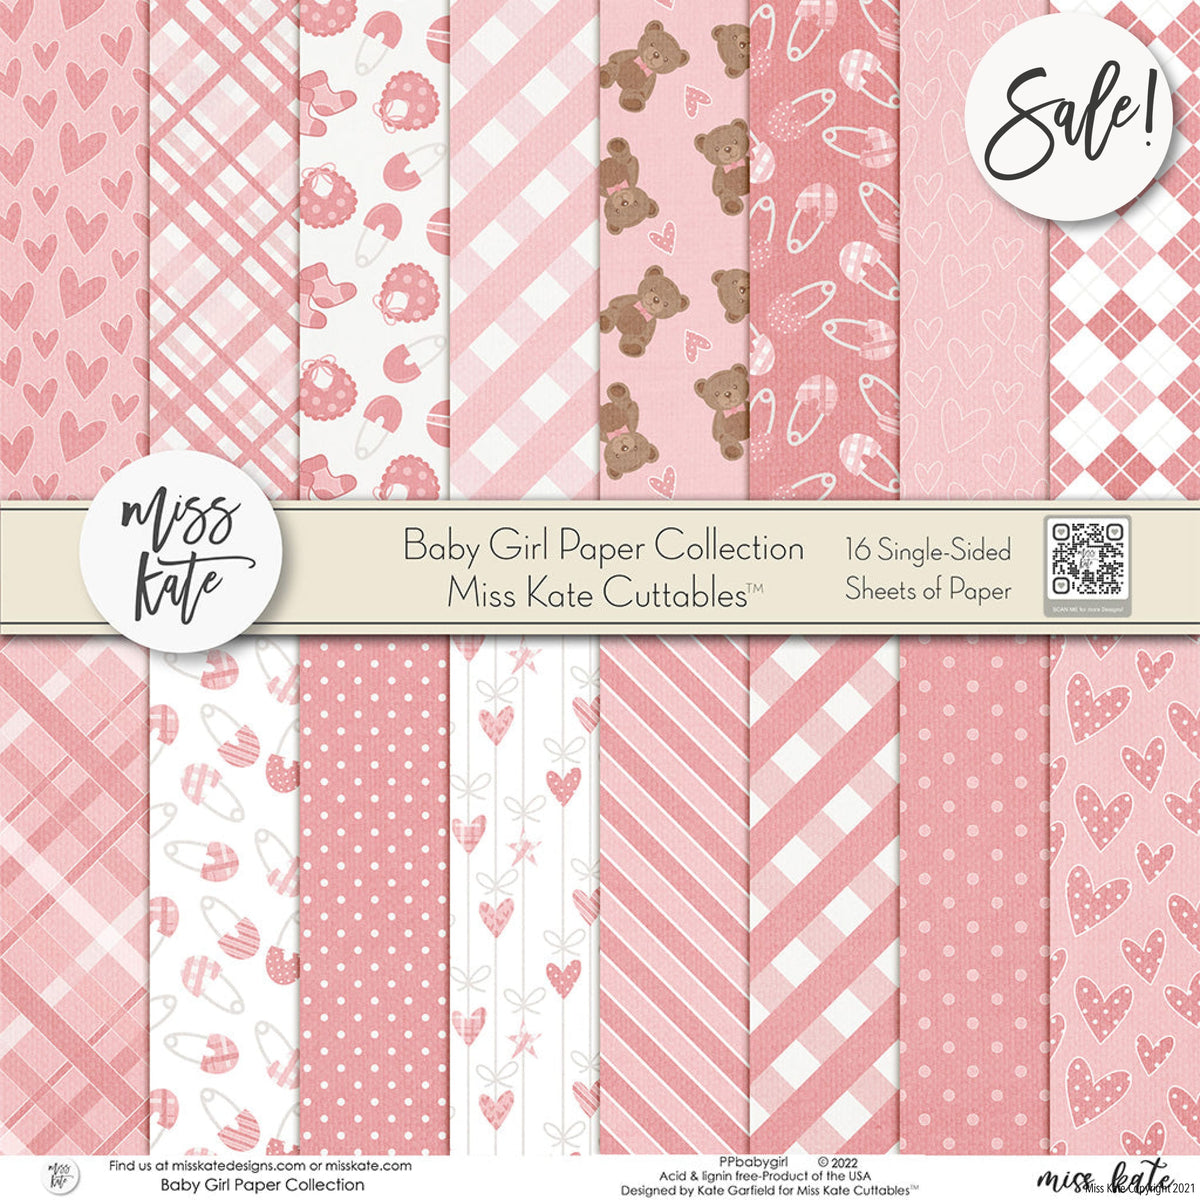 Baby Girl Scrapbook Paper: Craft paper pad | 10 Designs 20 Sheets 8.5 x 8.5  | Paper Arts, Origami, Scrapbooking, Decoupage, DIY Crafts, Stationery